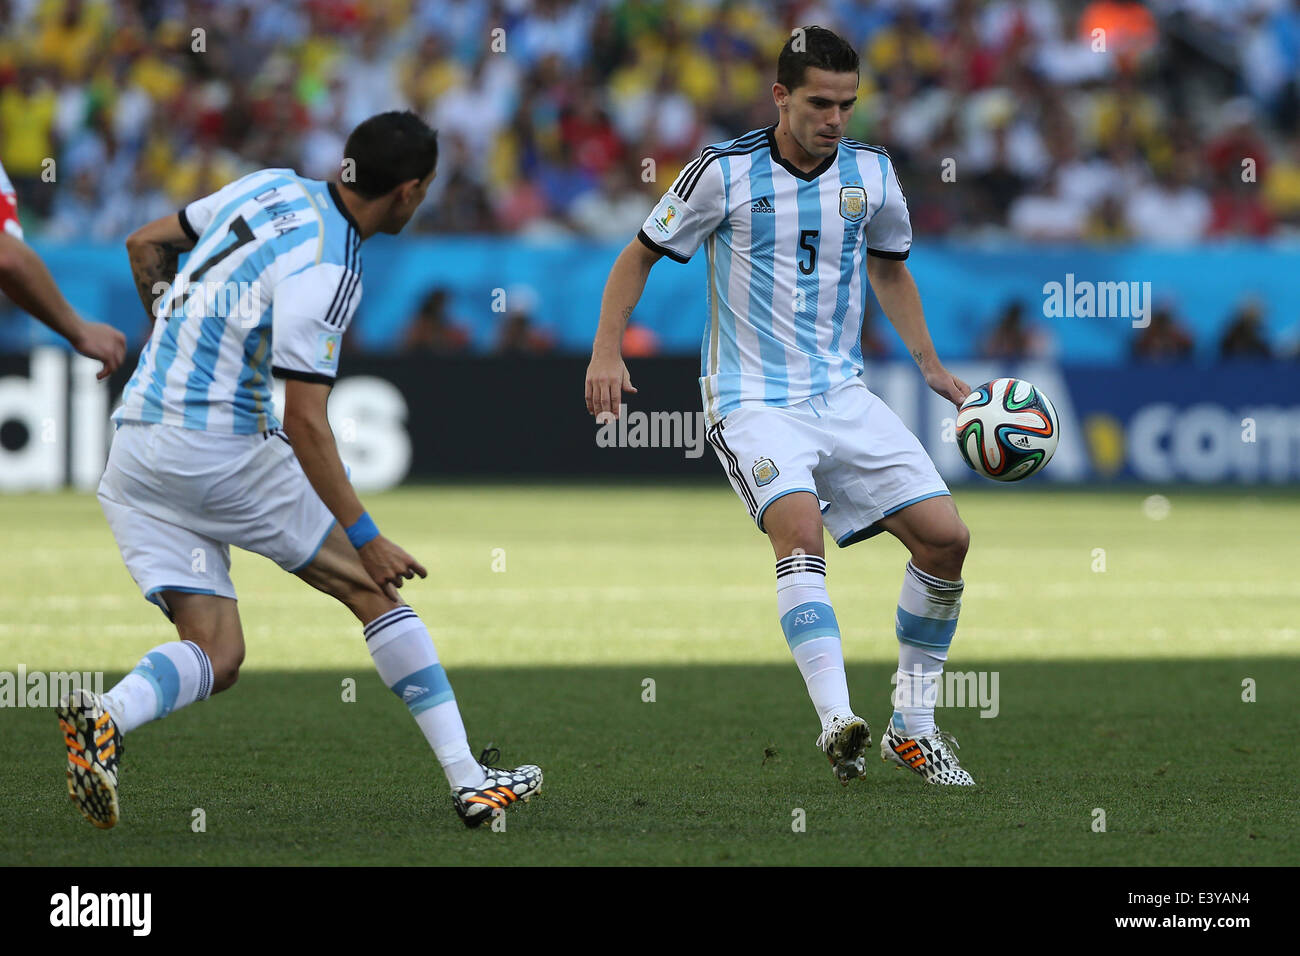 Sao Paulo, Brazil. 1st July, 2014. Argentina's Fernando Gago (R) controls the ball during a Round of 16 match between Argentina and Switzerland of 2014 FIFA World Cup at the Arena de Sao Paulo Stadium in Sao Paulo, Brazil, on July 1, 2014. Argentina won 1-0 over Switzerland after 120 minutes and qualified for quarter-finals on Tuesday. Credit:  Xu Zijian/Xinhua/Alamy Live News Stock Photo